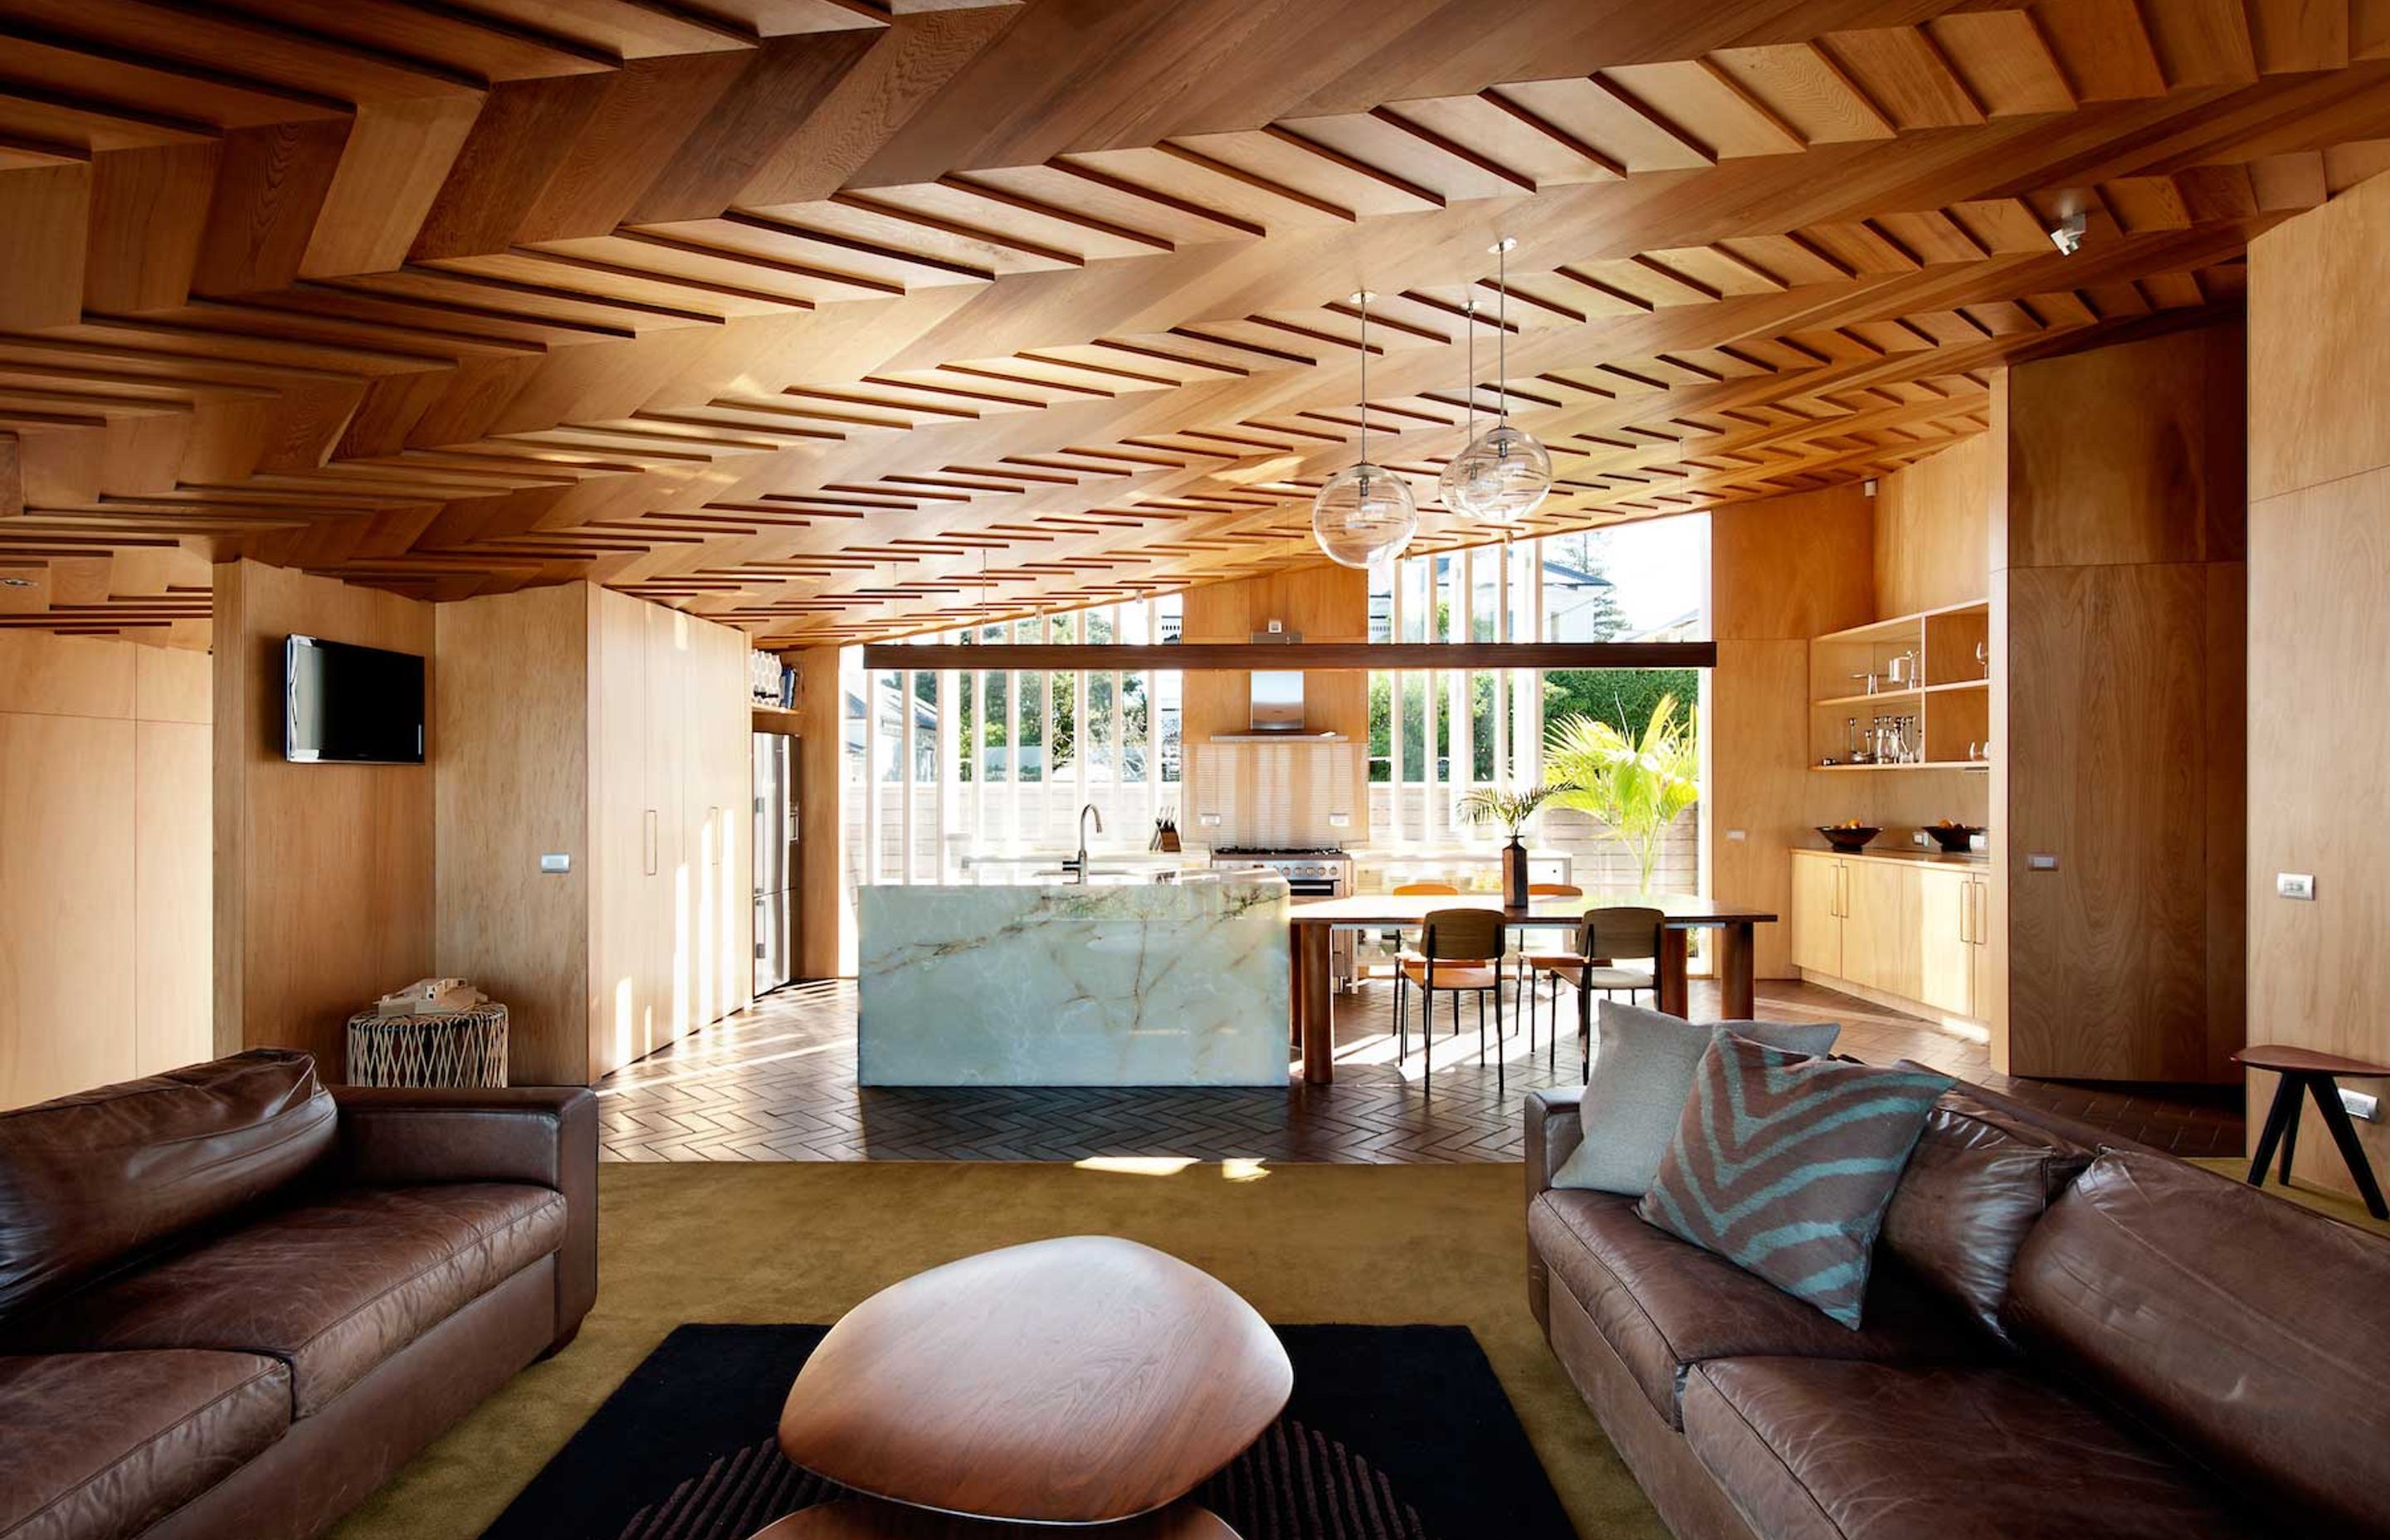 The warm and creative timber furniture and ceiling in the Wood Family Home, Auckland, was constructed by the client and the architect.